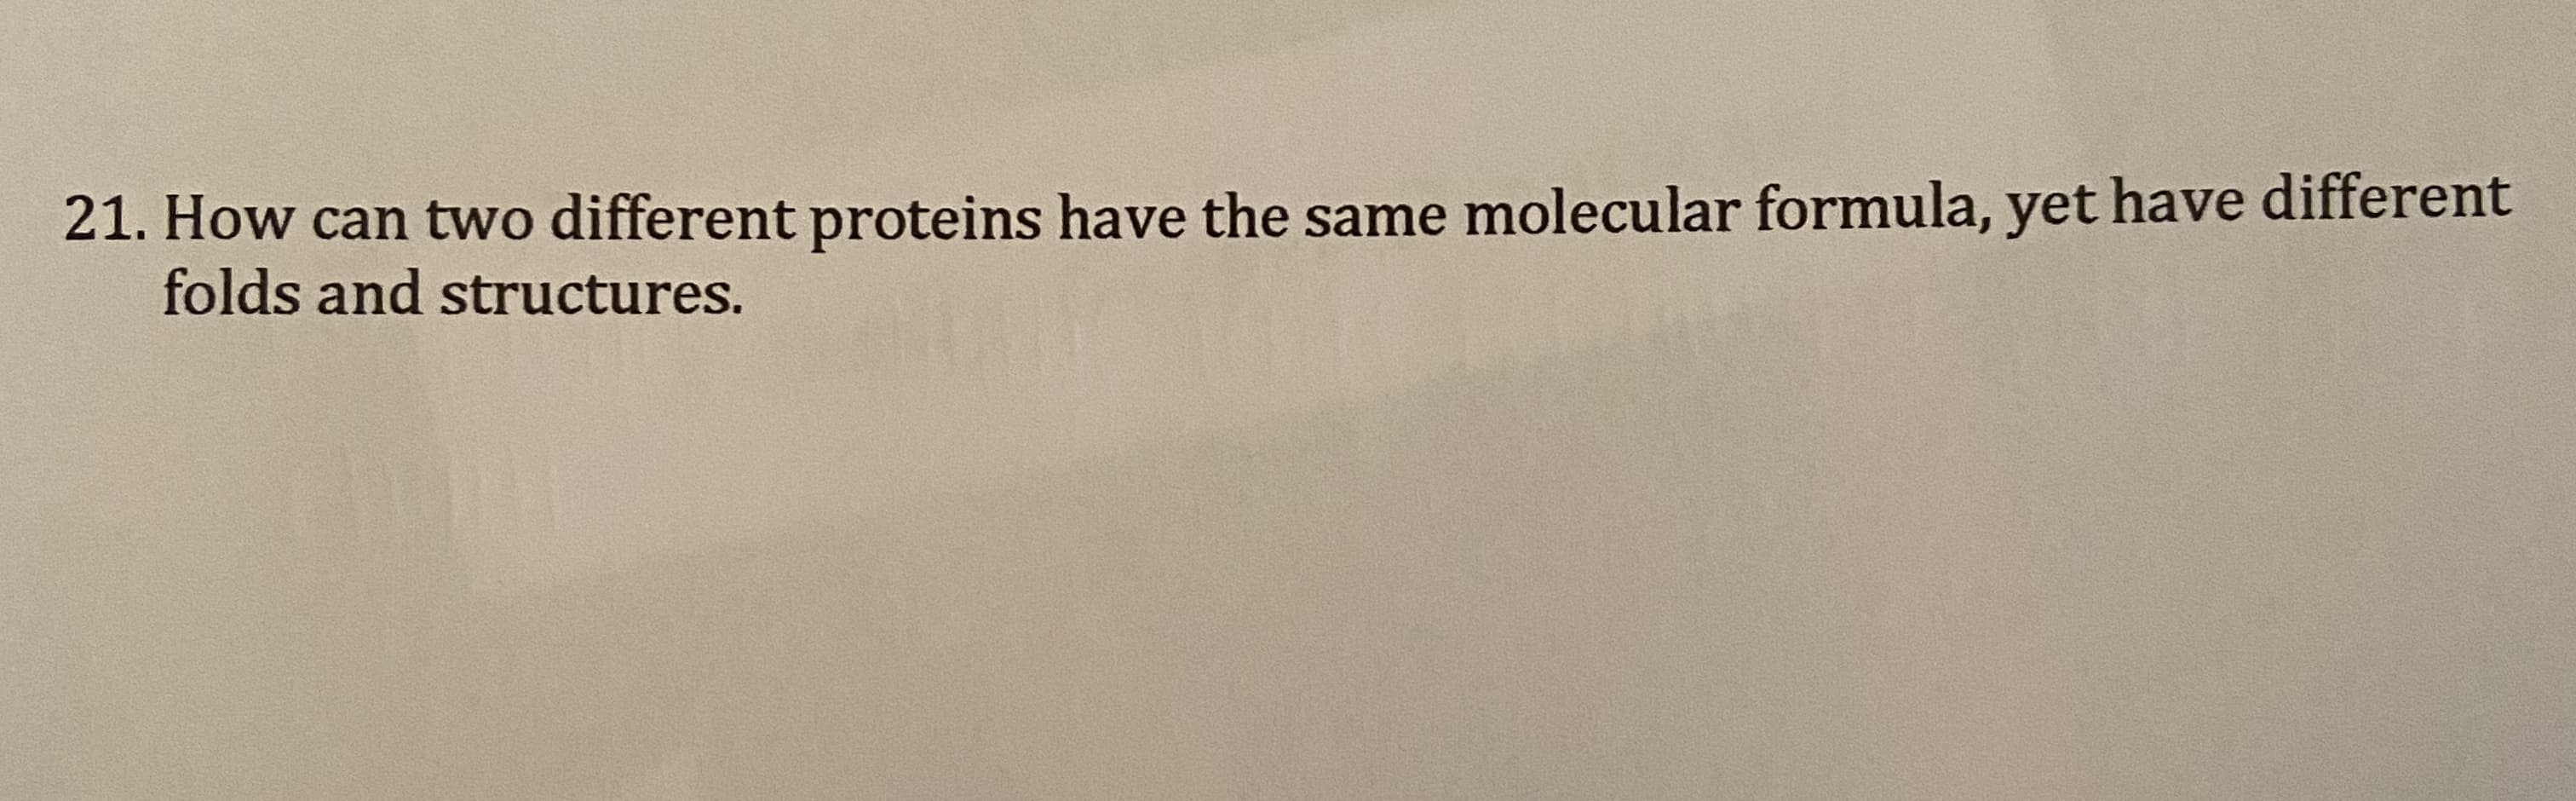 21. How can two different proteins have the same molecular formula, yet have different
folds and structures.
